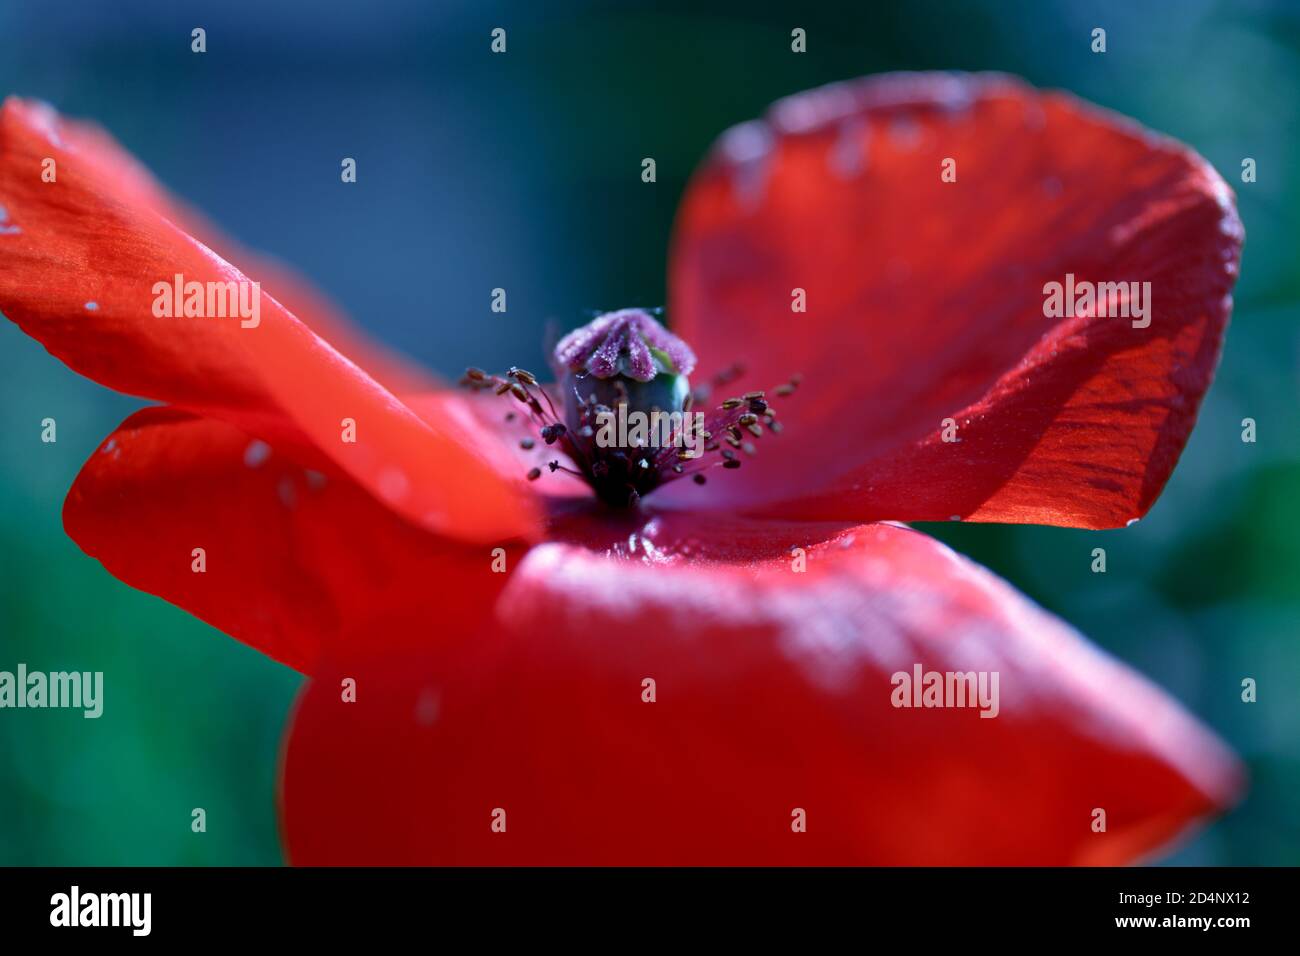 Red poppy flower. Opened petals of a flowering poppy with stamens and a poppy head. Blue-green blurred natural background. macro photography Stock Photo